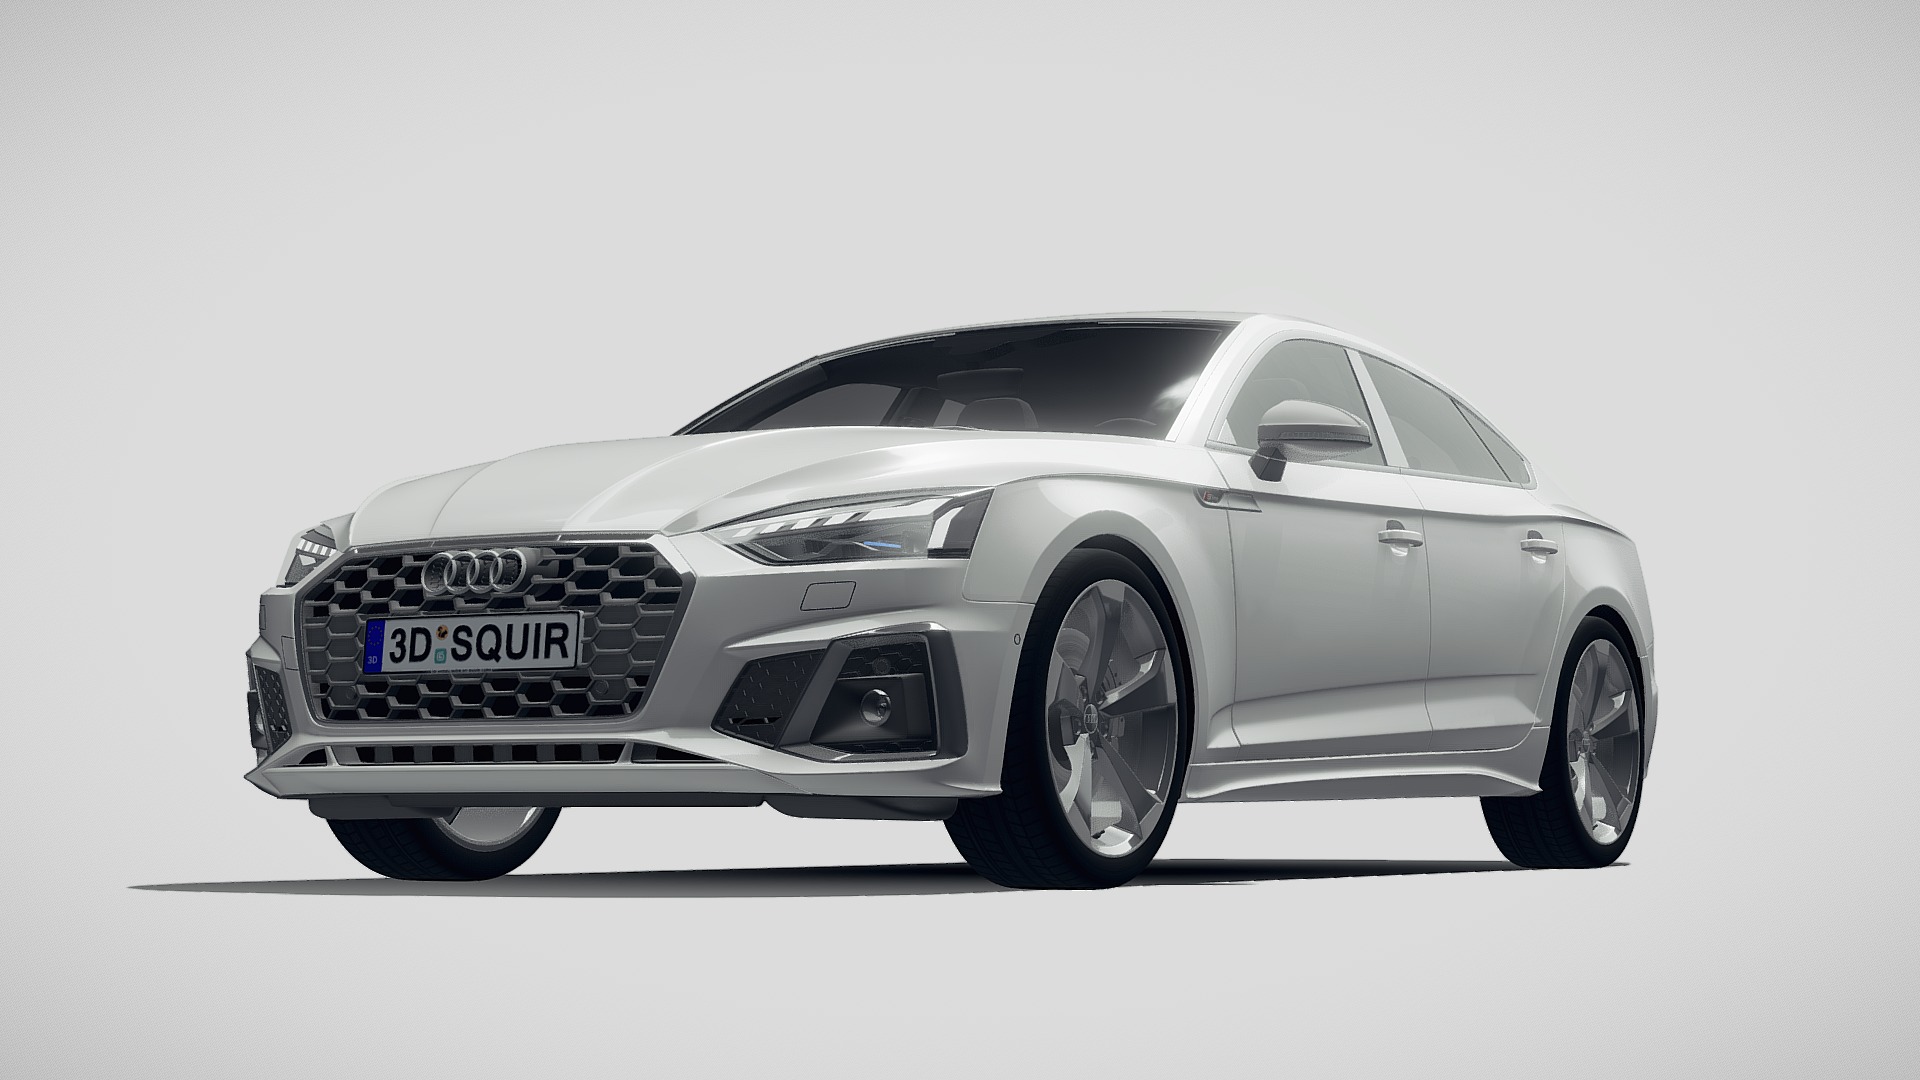 3D model Audi A5 Sportback S-line 2020 - This is a 3D model of the Audi A5 Sportback S-line 2020. The 3D model is about a silver car with a black background.